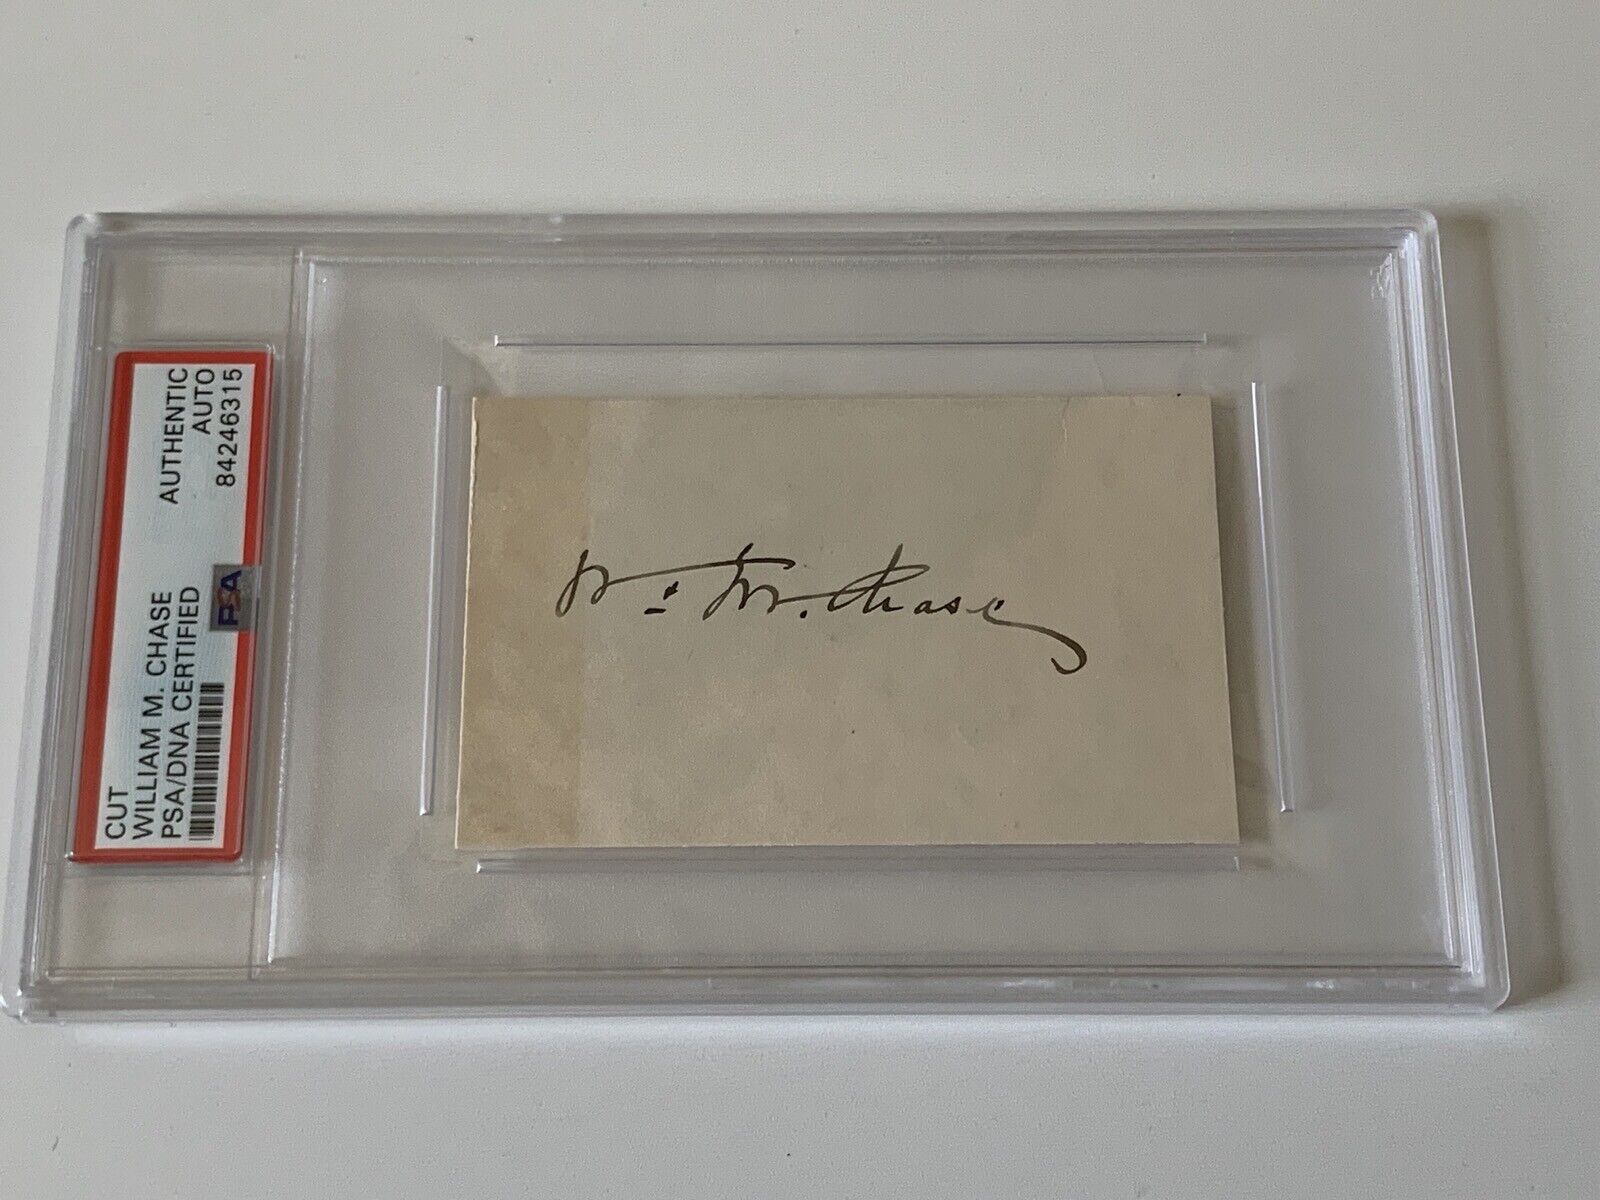 William M Chase American Painter Signed Autograph Cut PSA DNA j2f1c